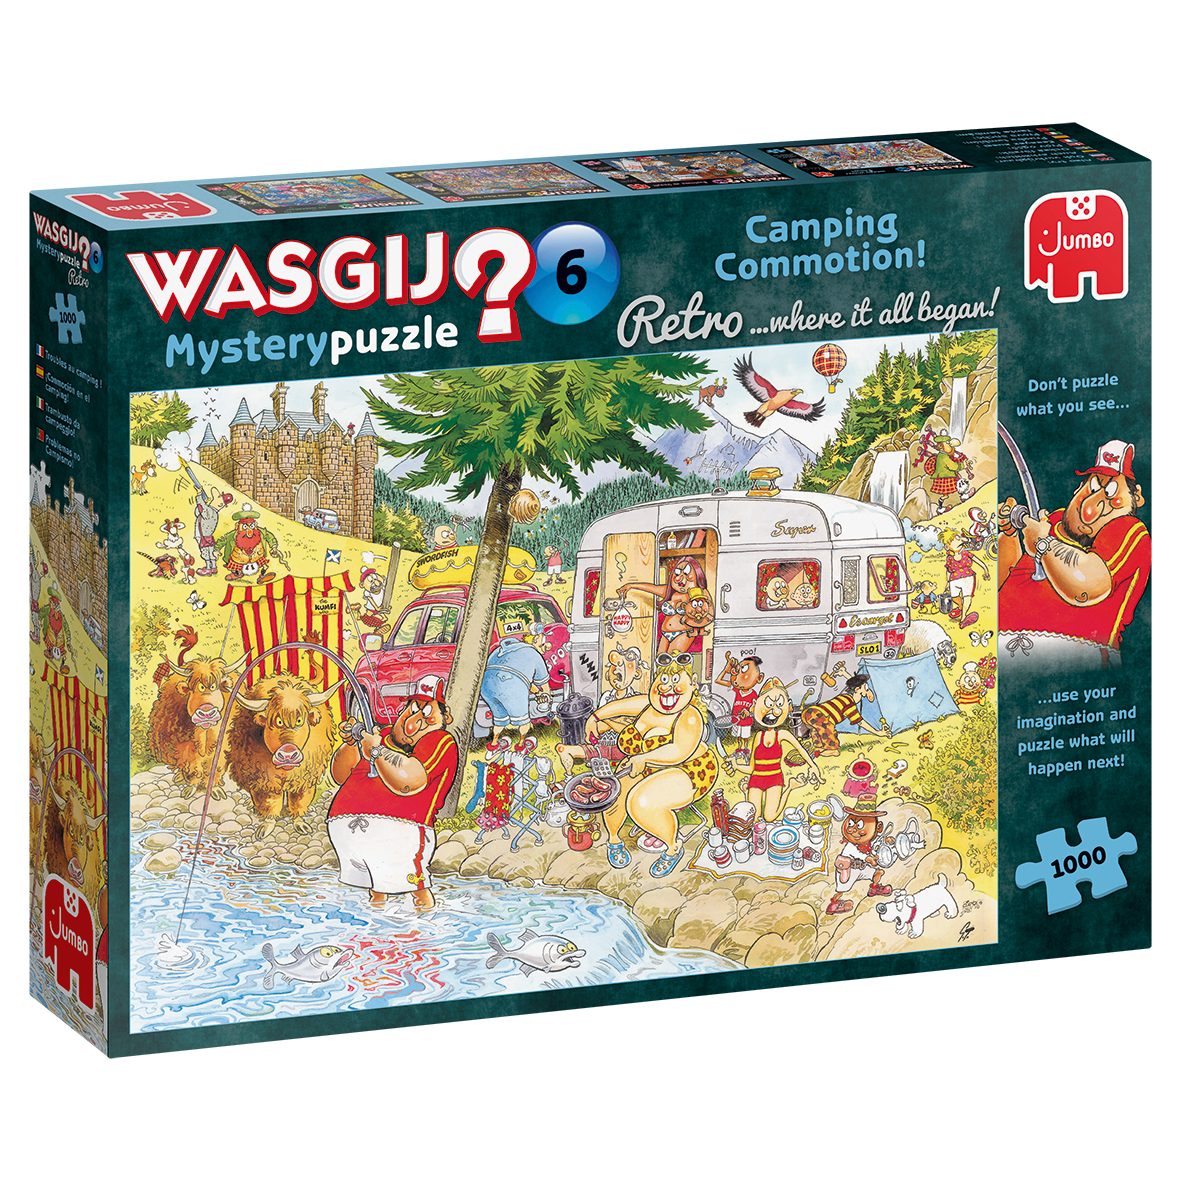 Puzzleteile Wasgij Mystery Retro 1000 6 Camping Chaos, Jumbo Puzzle Spiele